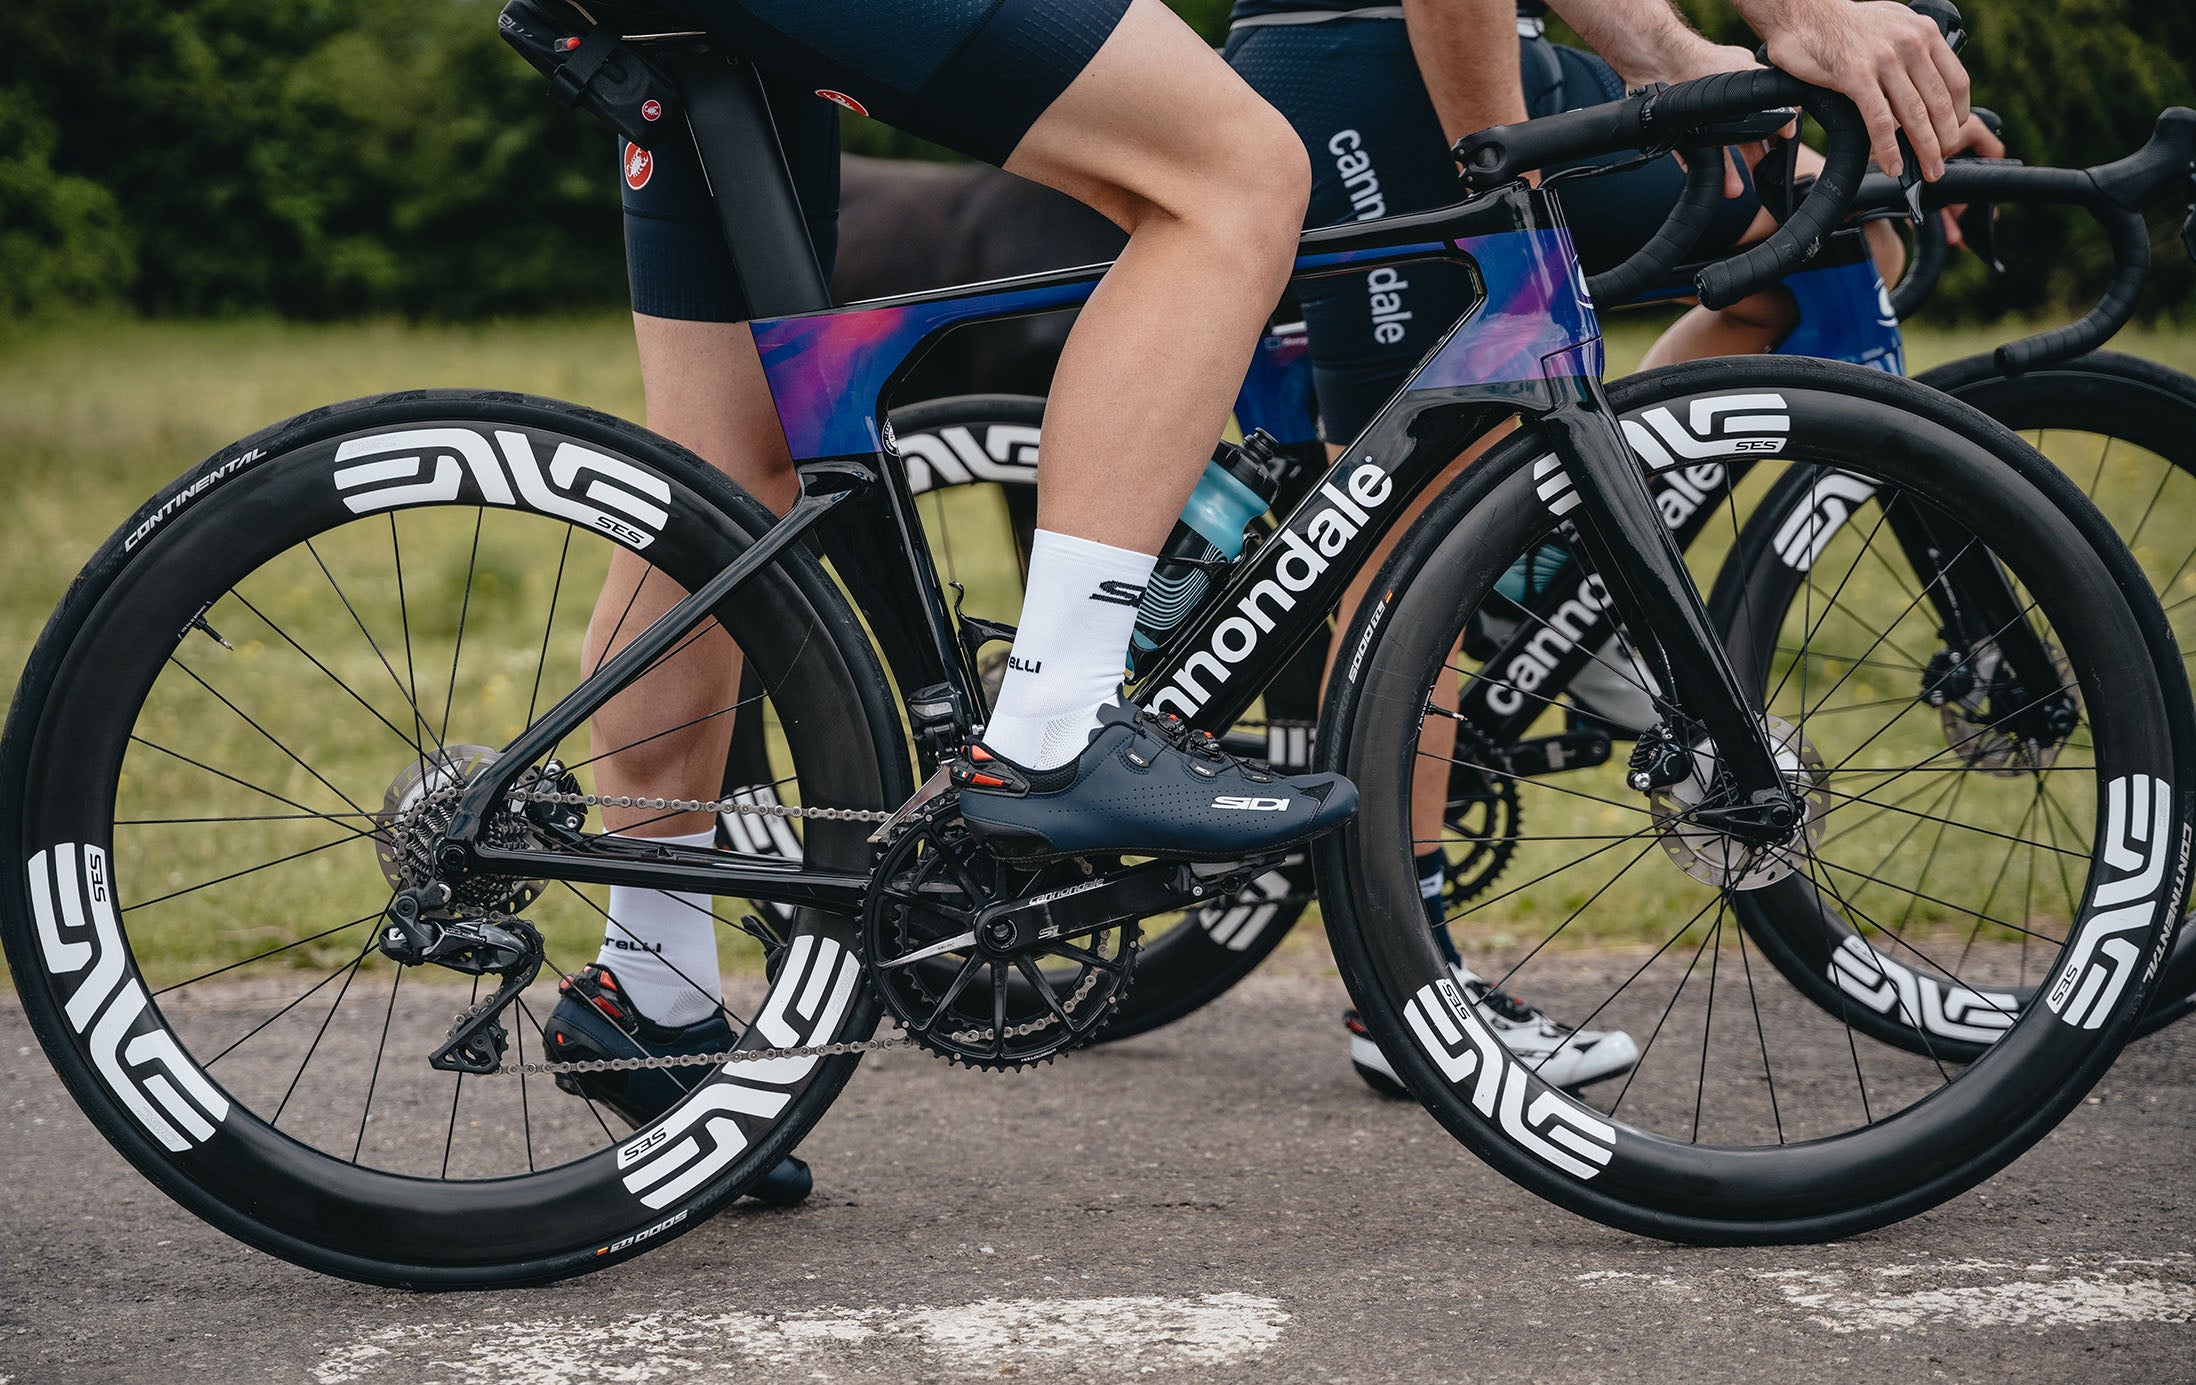 Sidi Sponsored Riders Wear Sixty, Shot and Wire 2 Shoes at Giro d'Italia